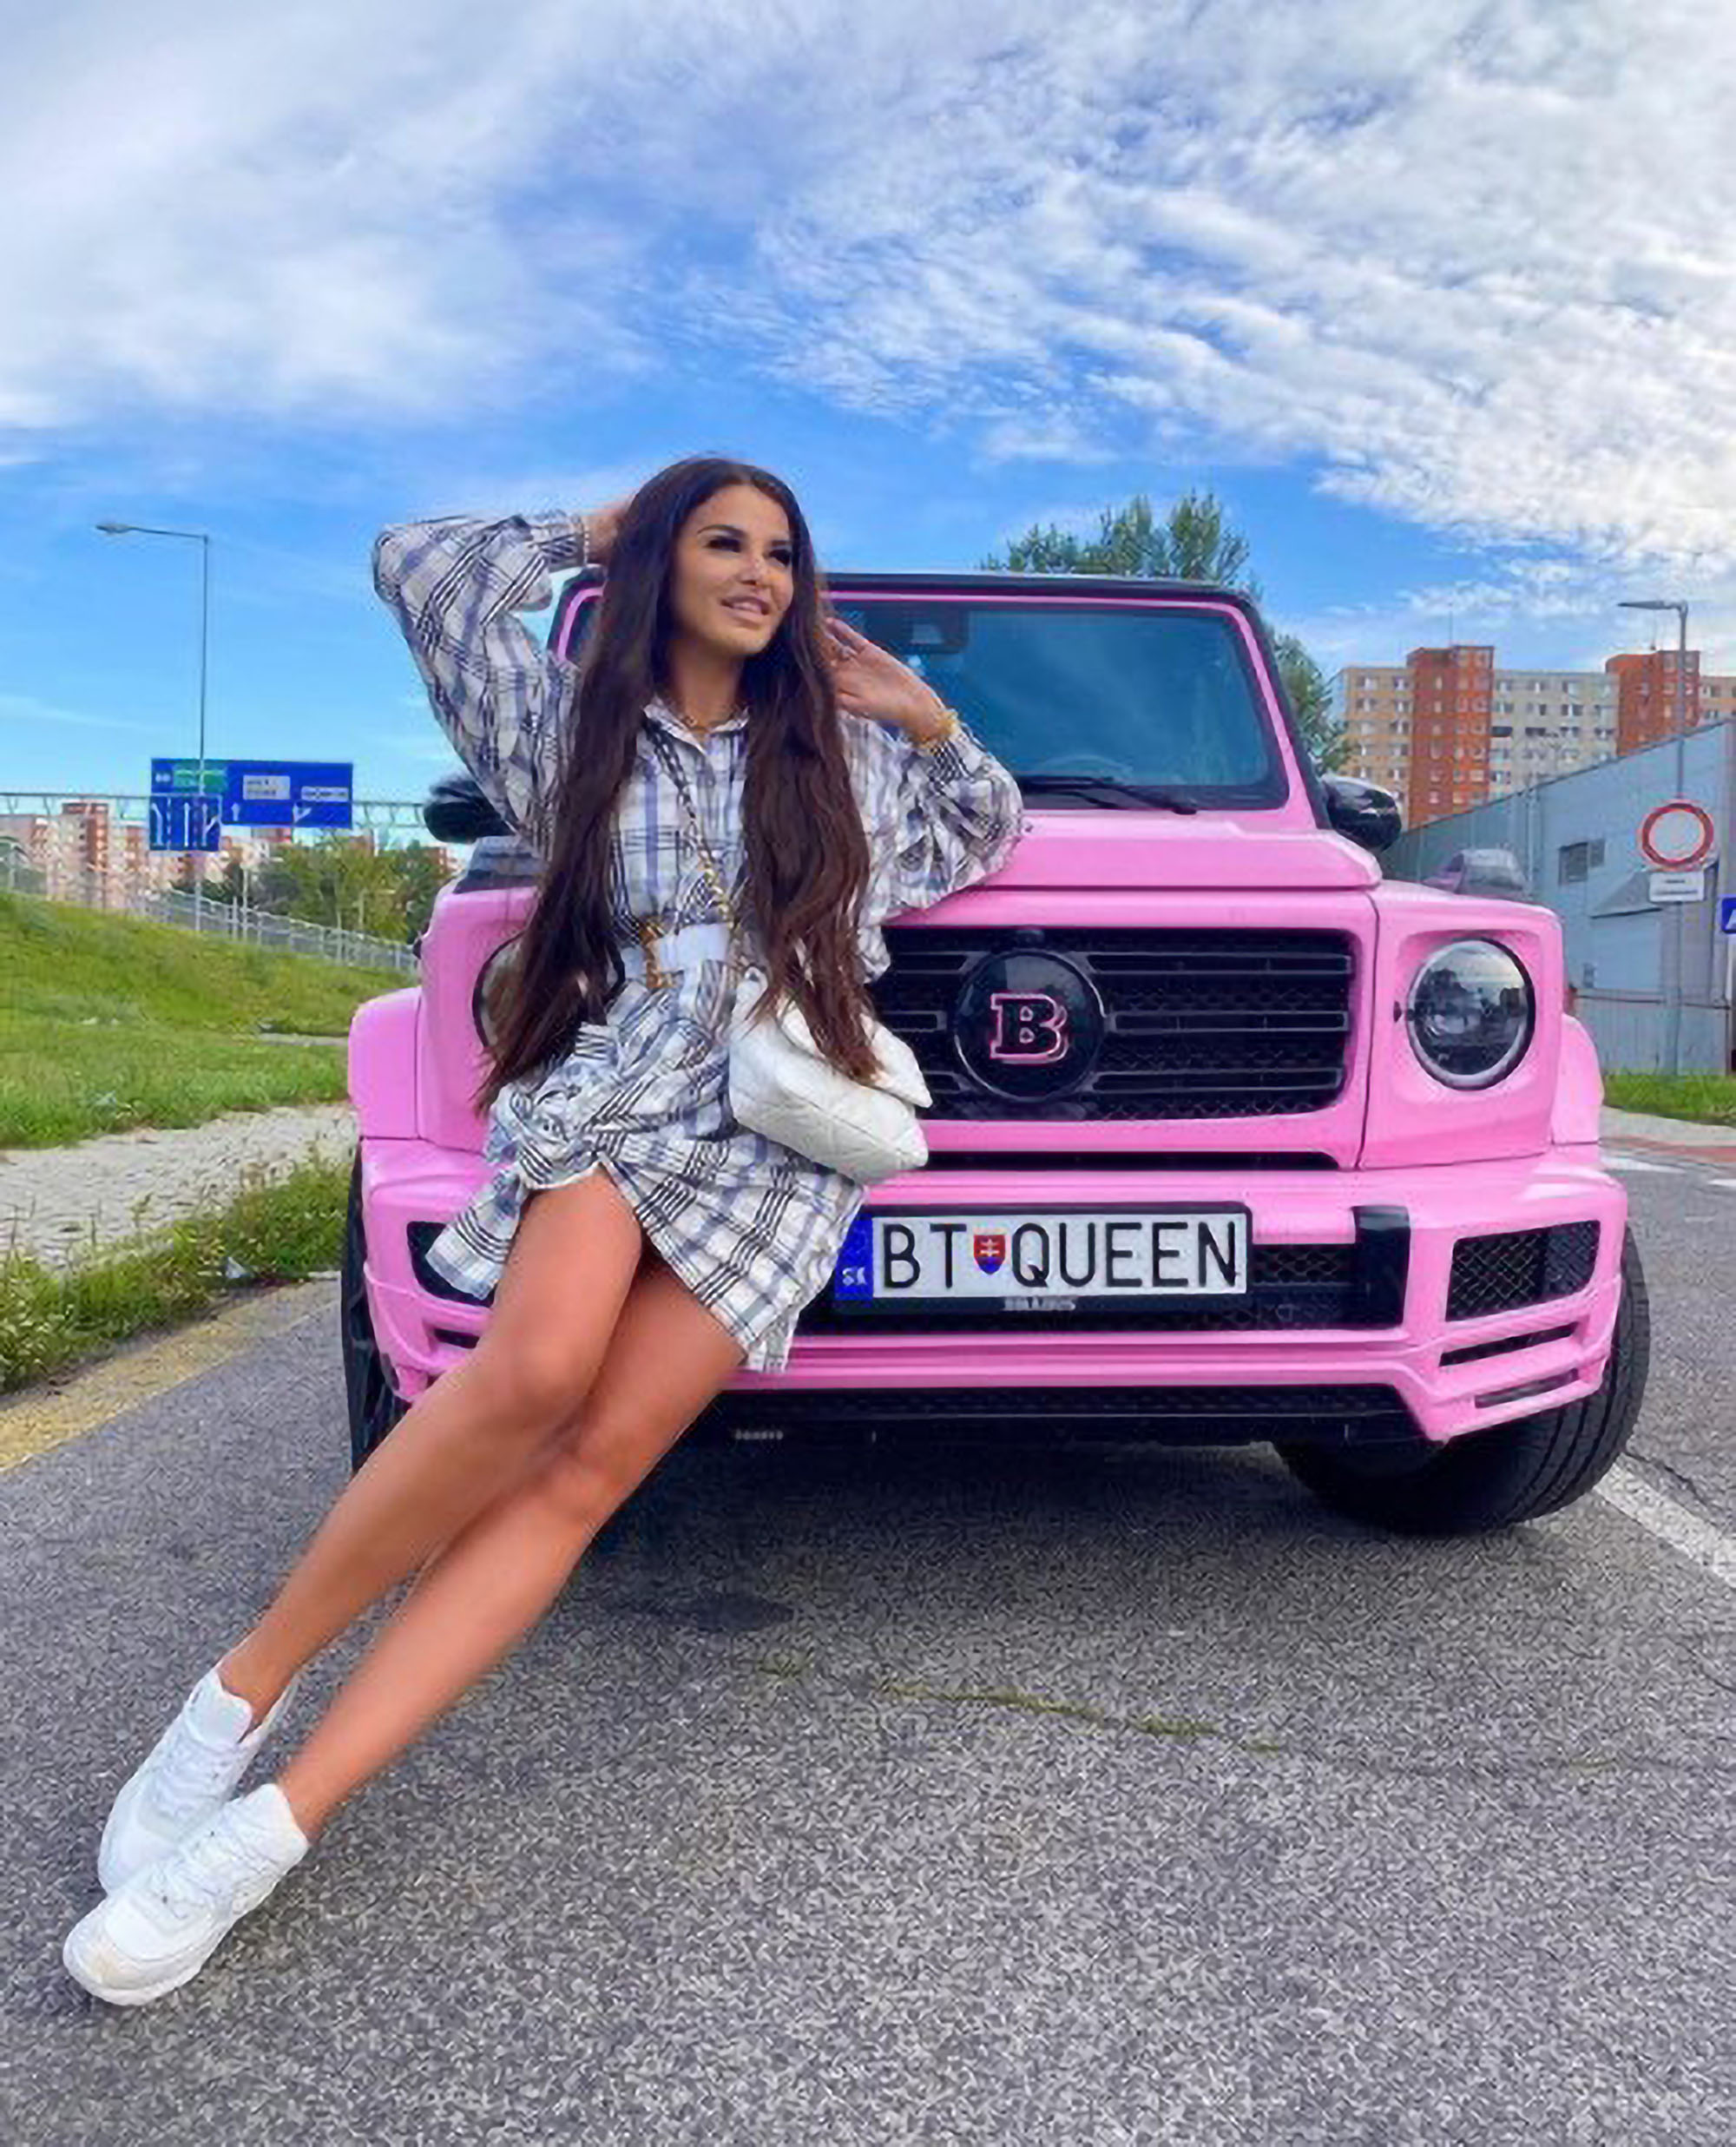 Read more about the article Stunning Slovak Model Who Flaunted Wealth Online Arrested In Mega Raid Targeting Drug Gang